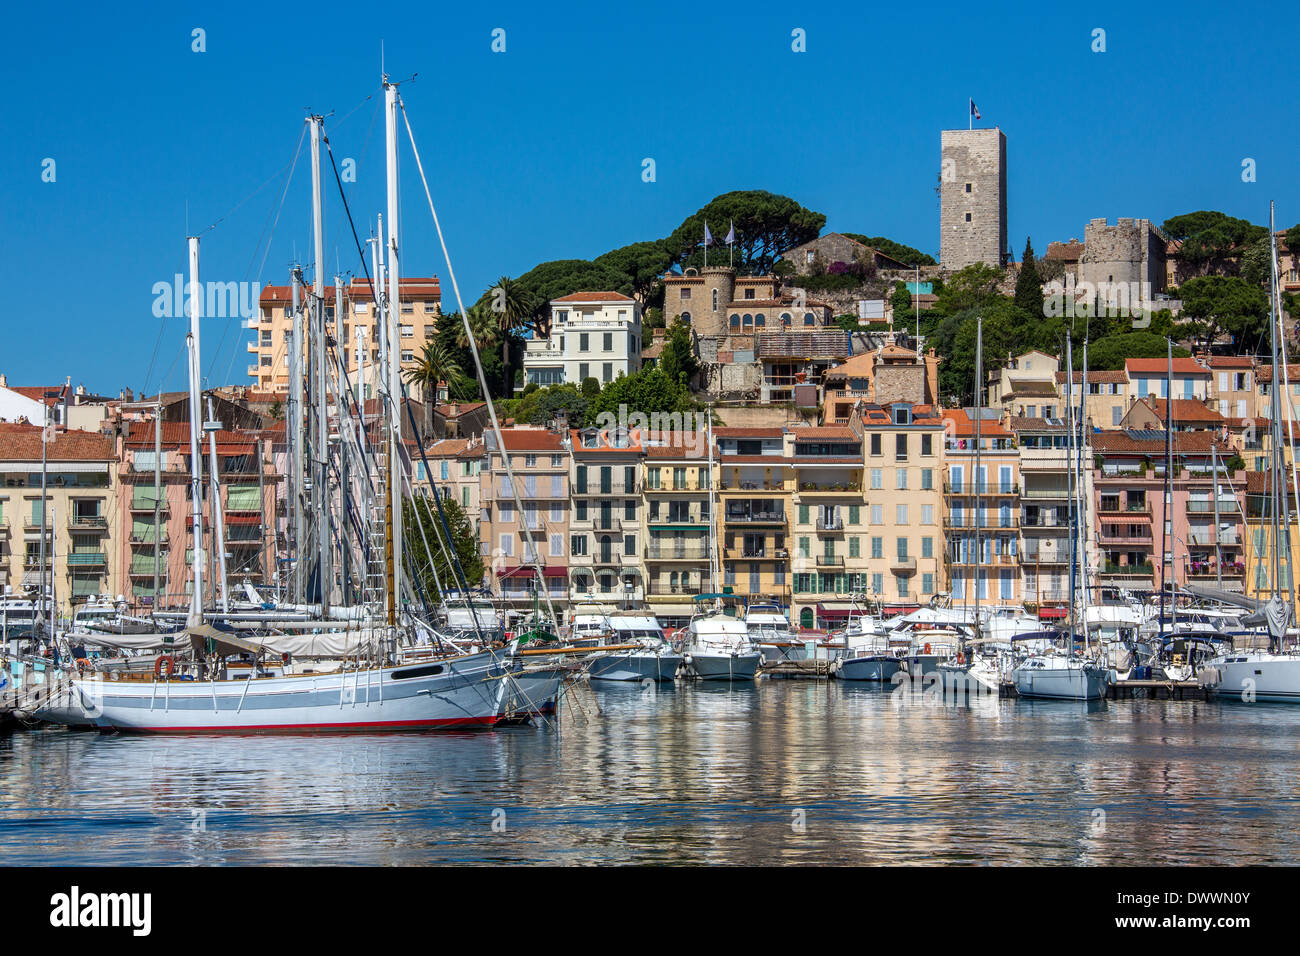 The harbor in Cannes old town on the Cote d'Azur in the South of France. Stock Photo